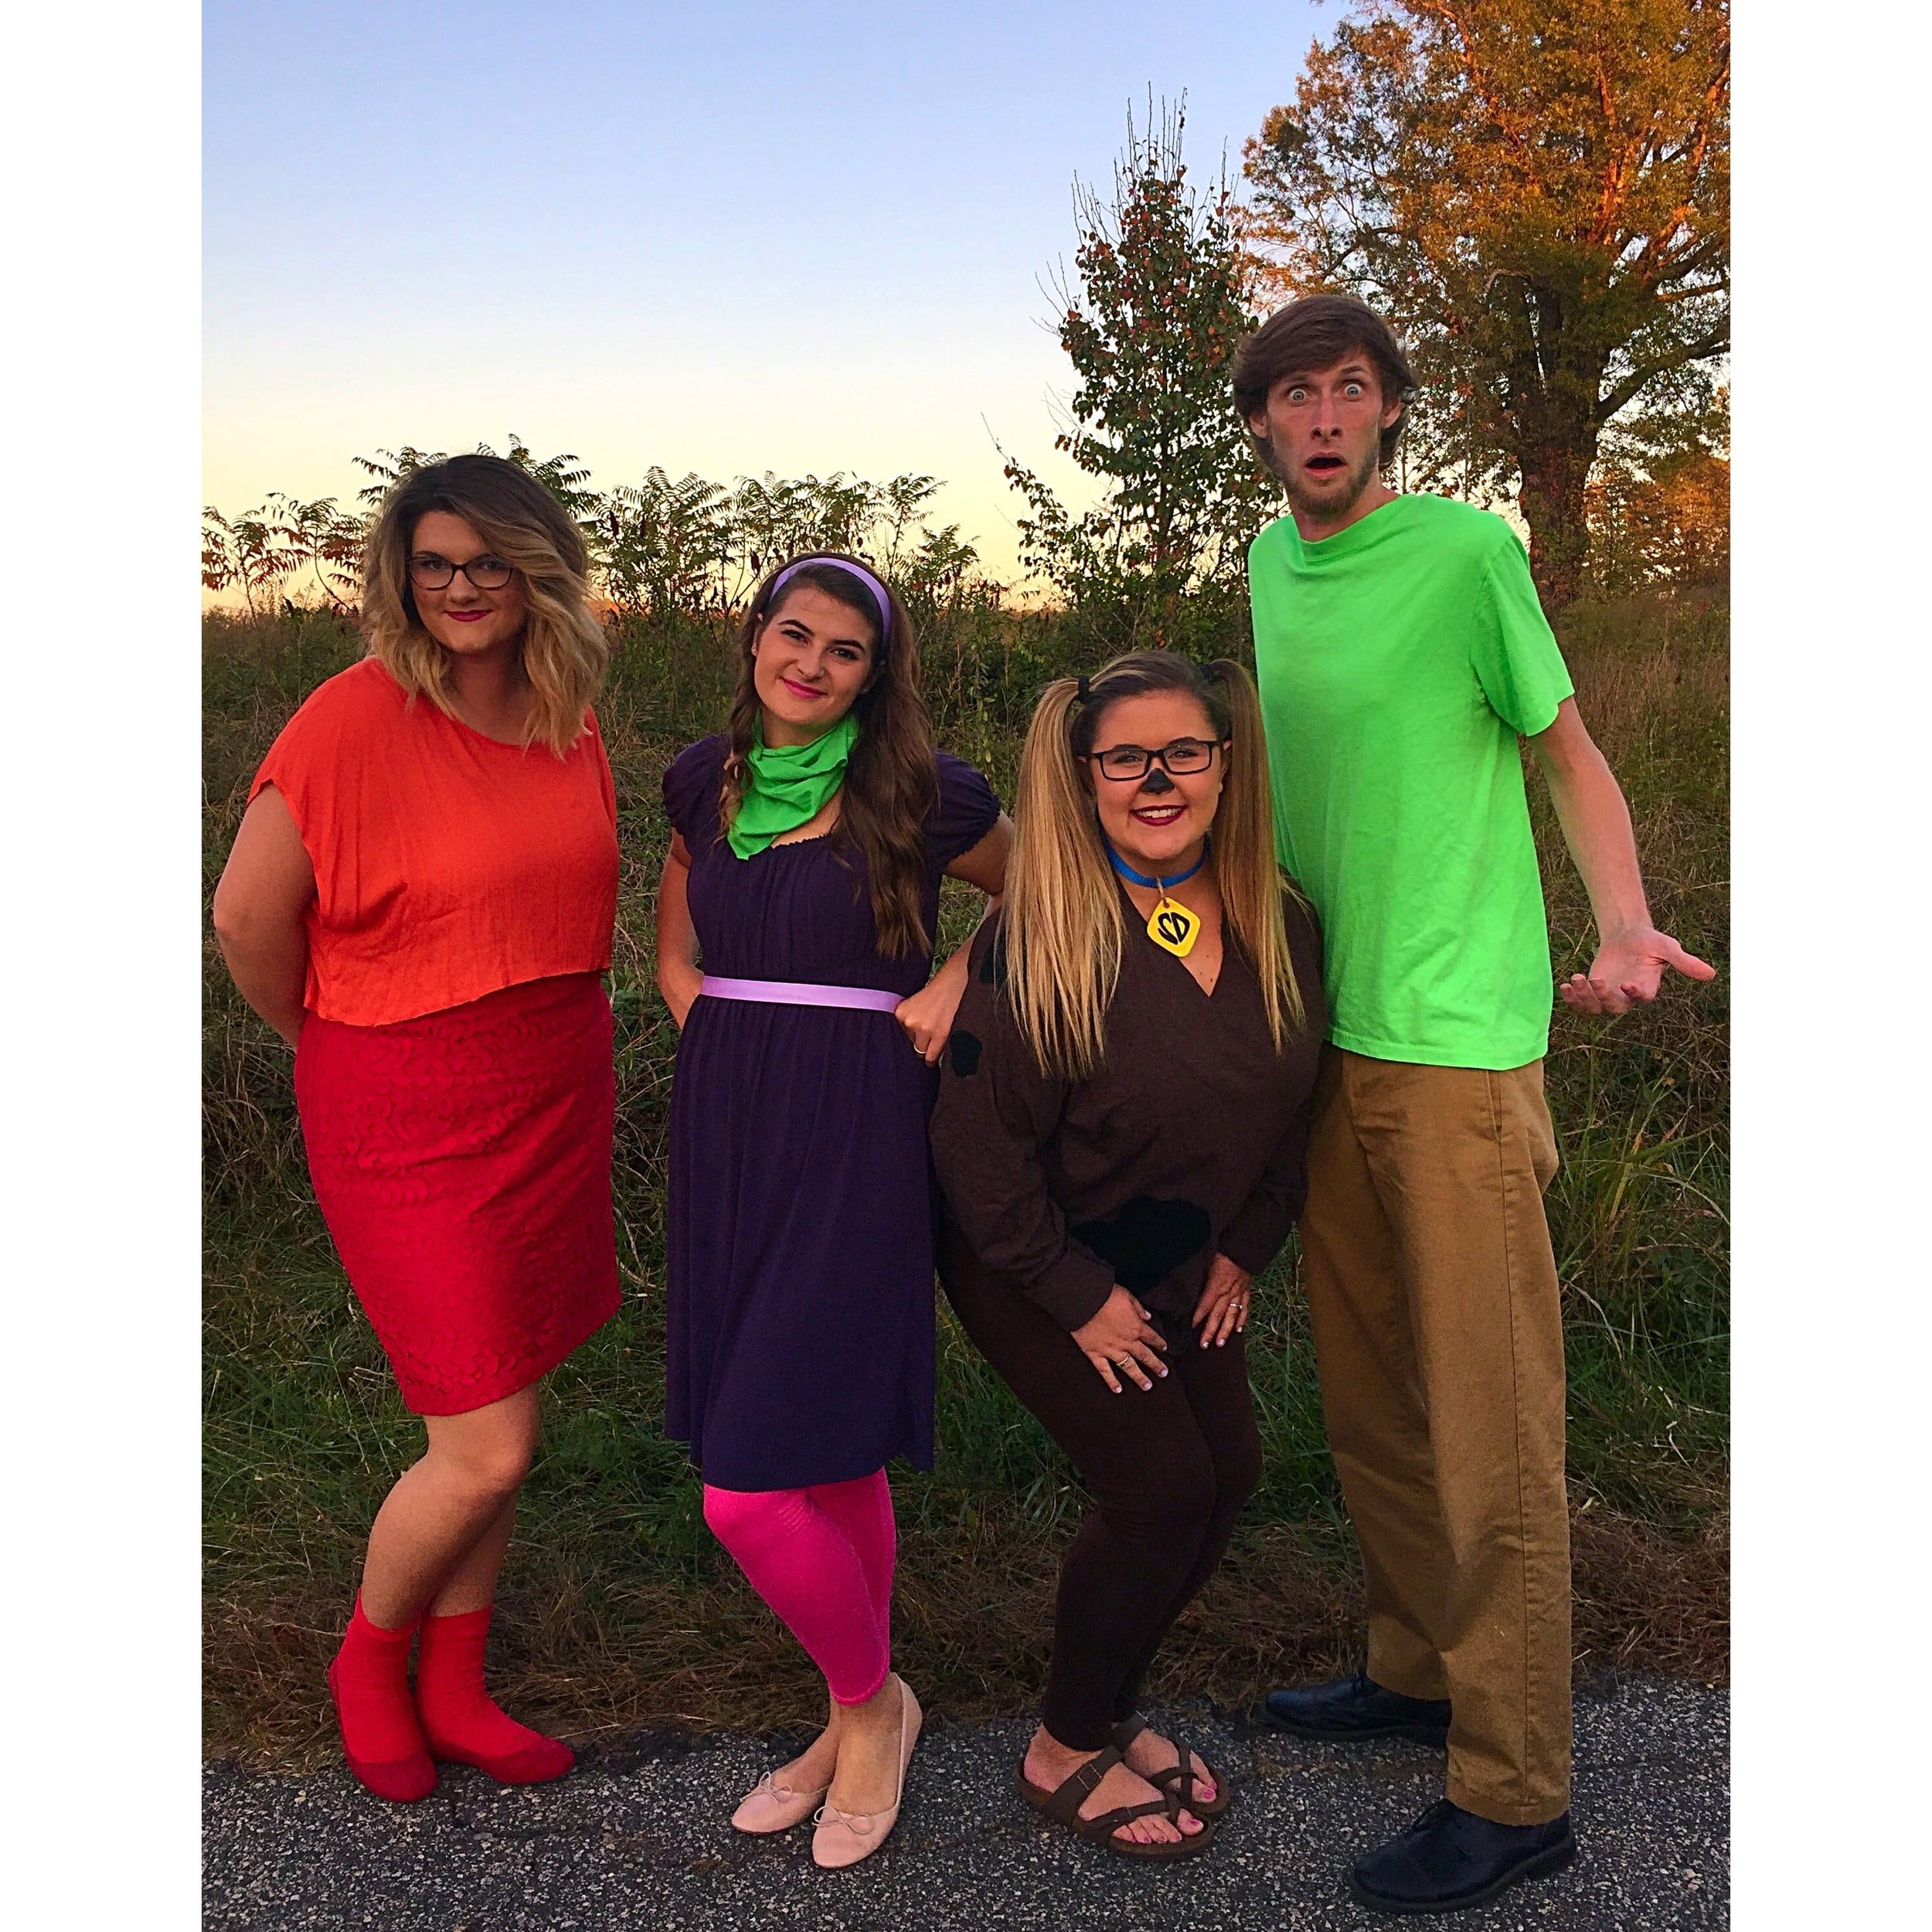 Emily Jenkins (junior), Libby Smith (sophomore), Cameron Burroughs (junior), and Cody Pendarvis (junior) dressing as their favorite cartoon characters from Scooby Doo.